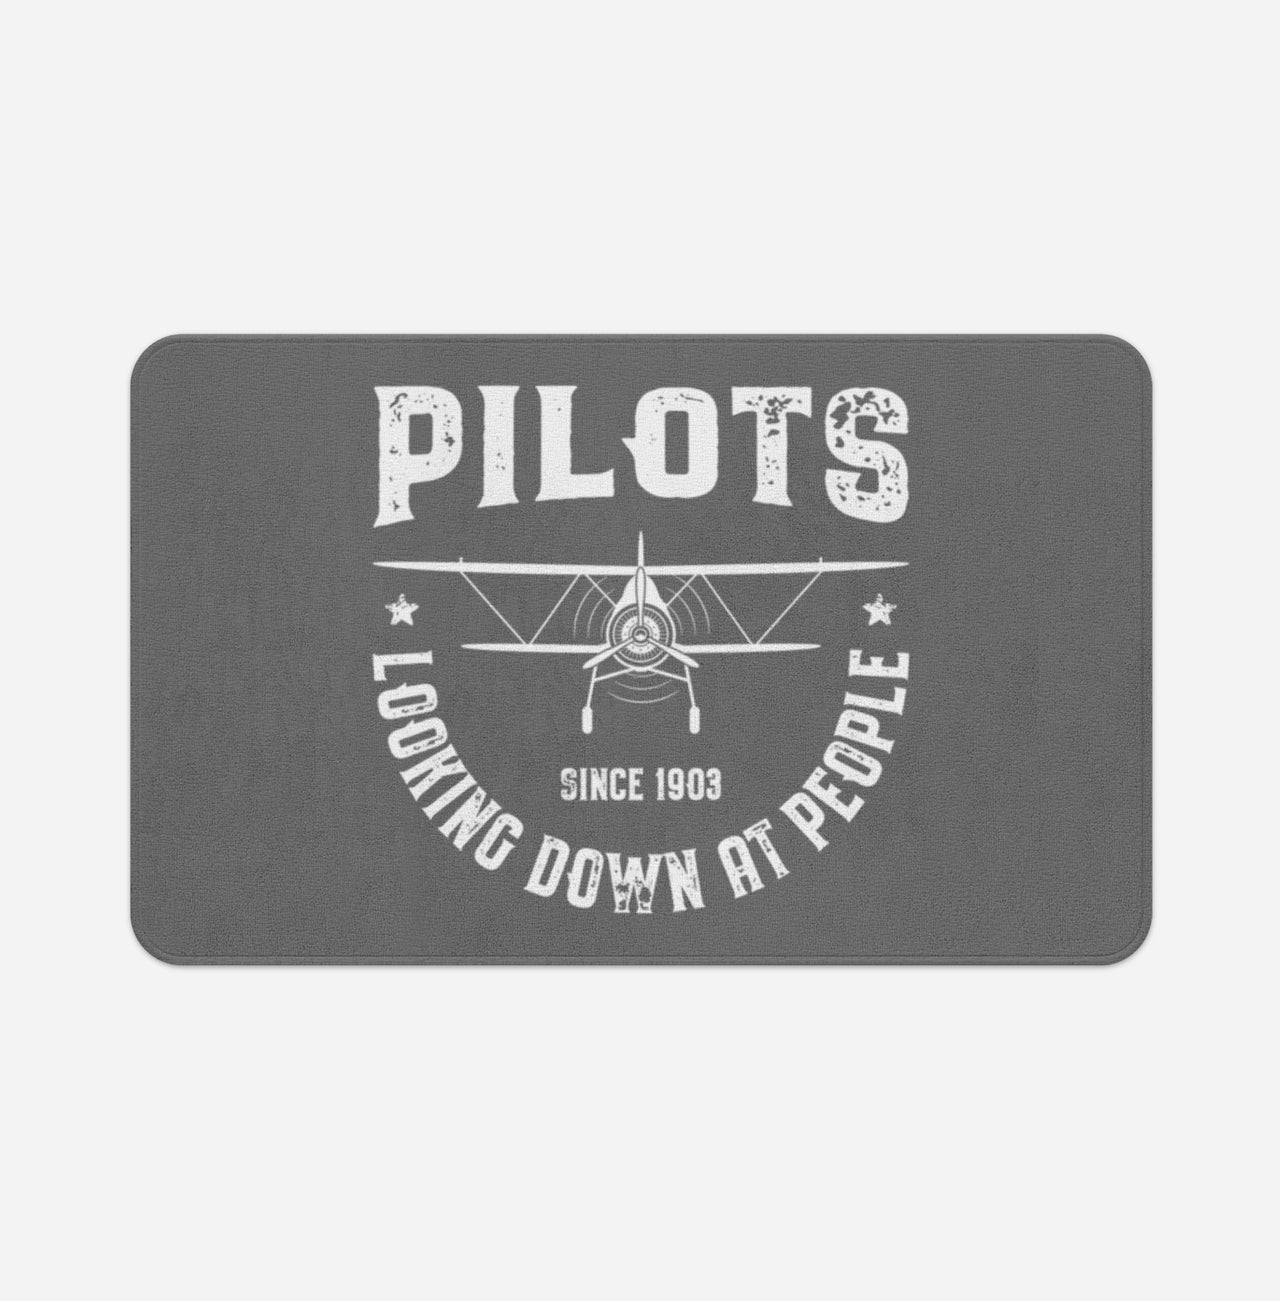 Pilots Looking Down at People Since 1903 Designed Bath Mats